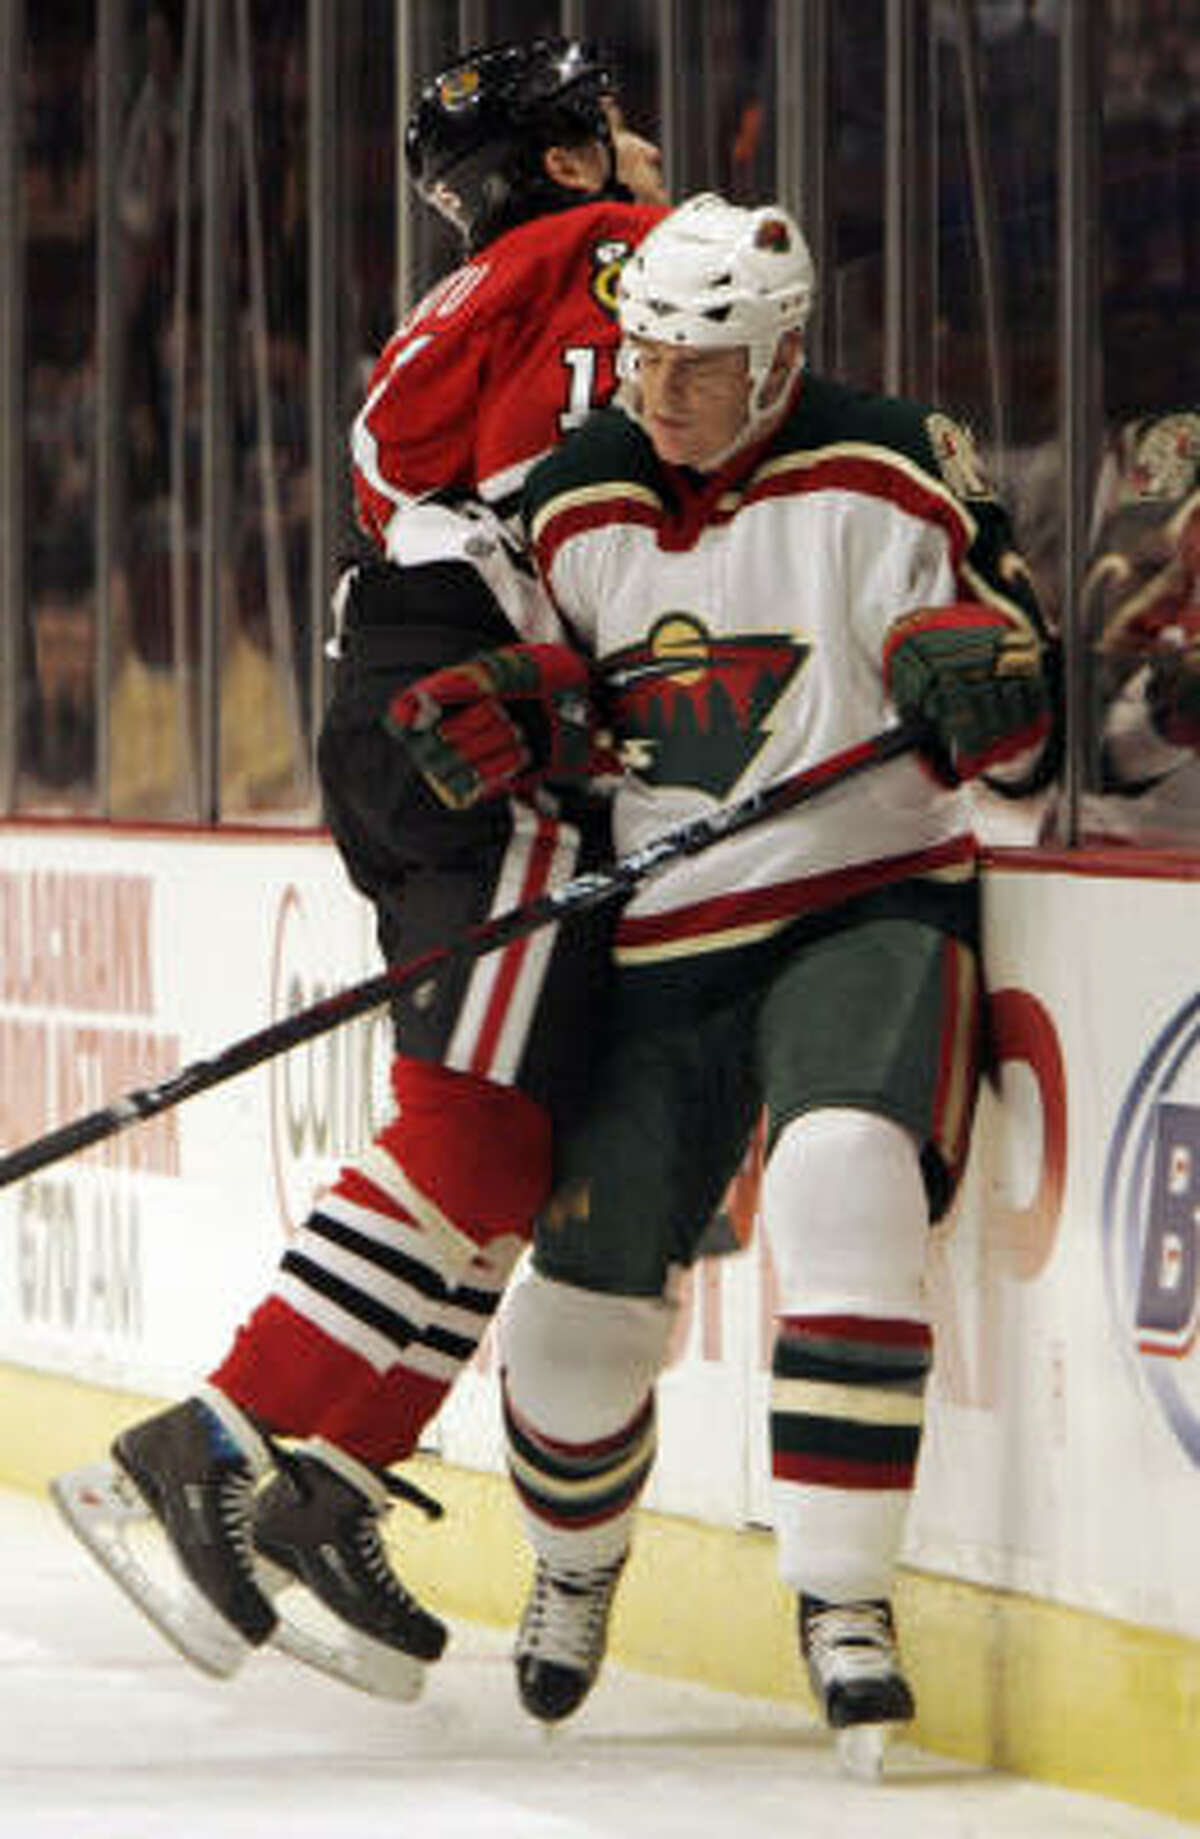 Former Aeros player Kurtis Foster, now with Minnesota, takes a check from Tuomo Ruutu of host Chicago.